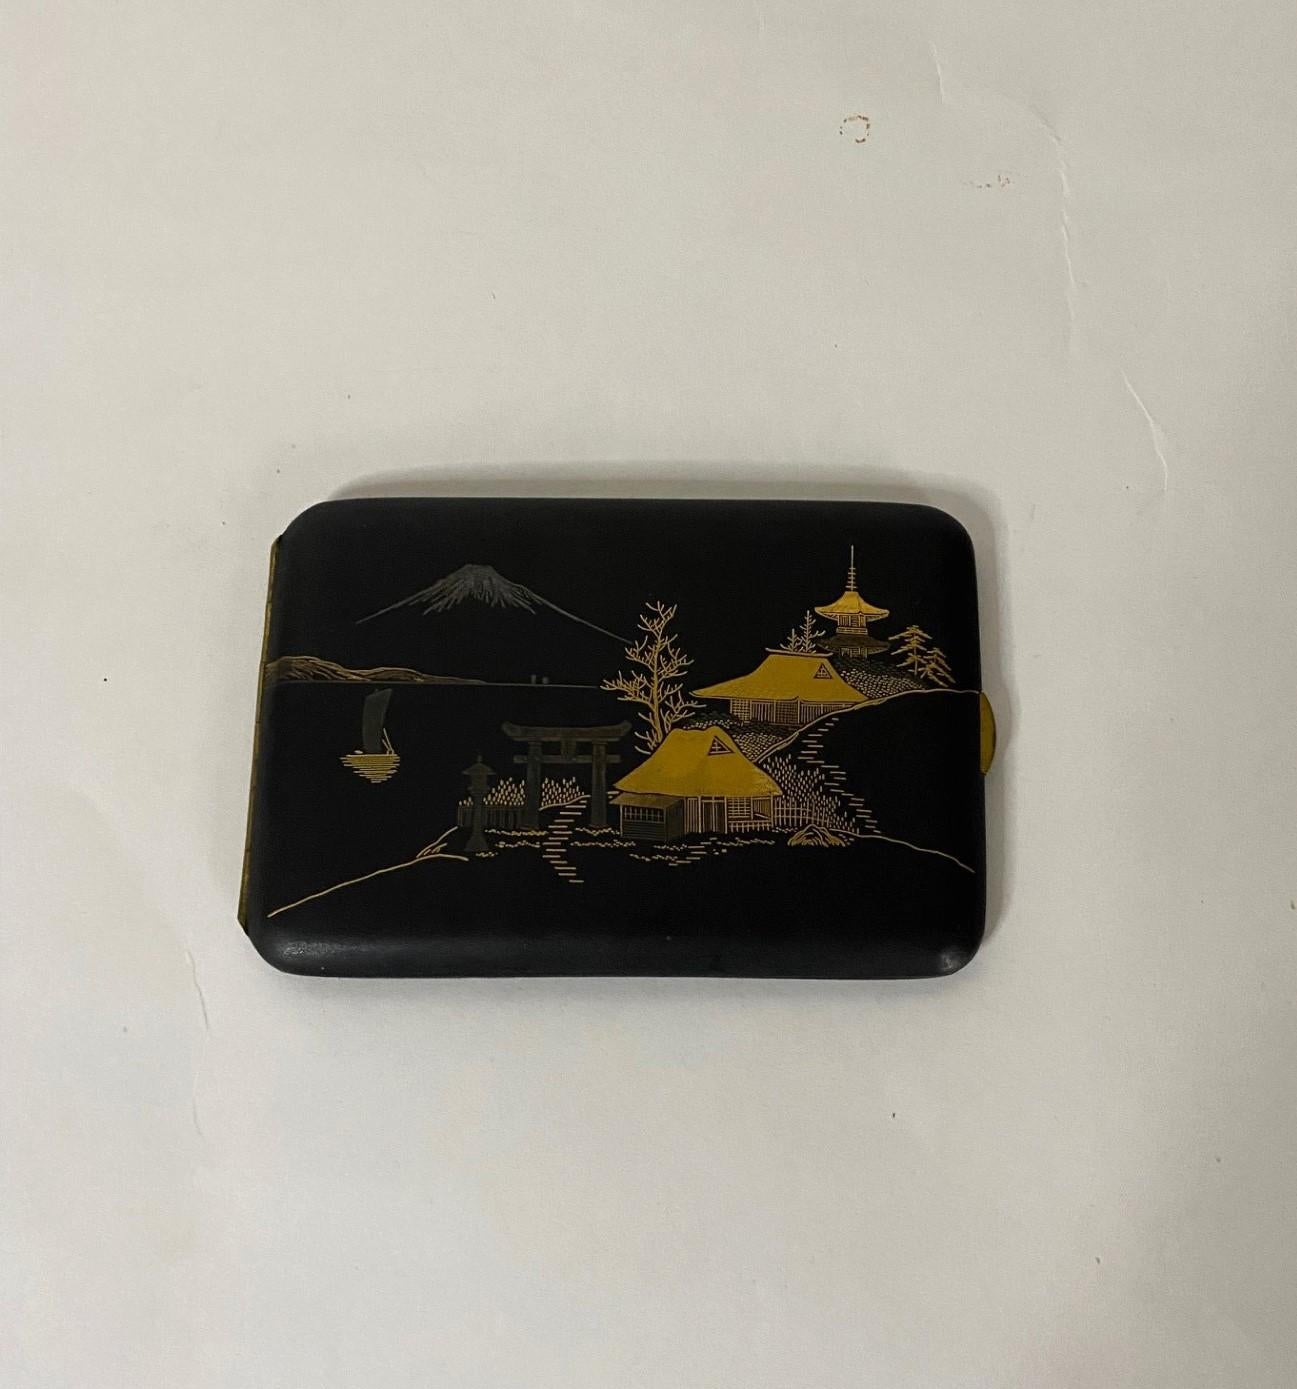 Make an impressive elegant statement with this early 20th century unique Japanese brass cigarette case.  The sleek black folding case has a artistically etched scene on its cover.